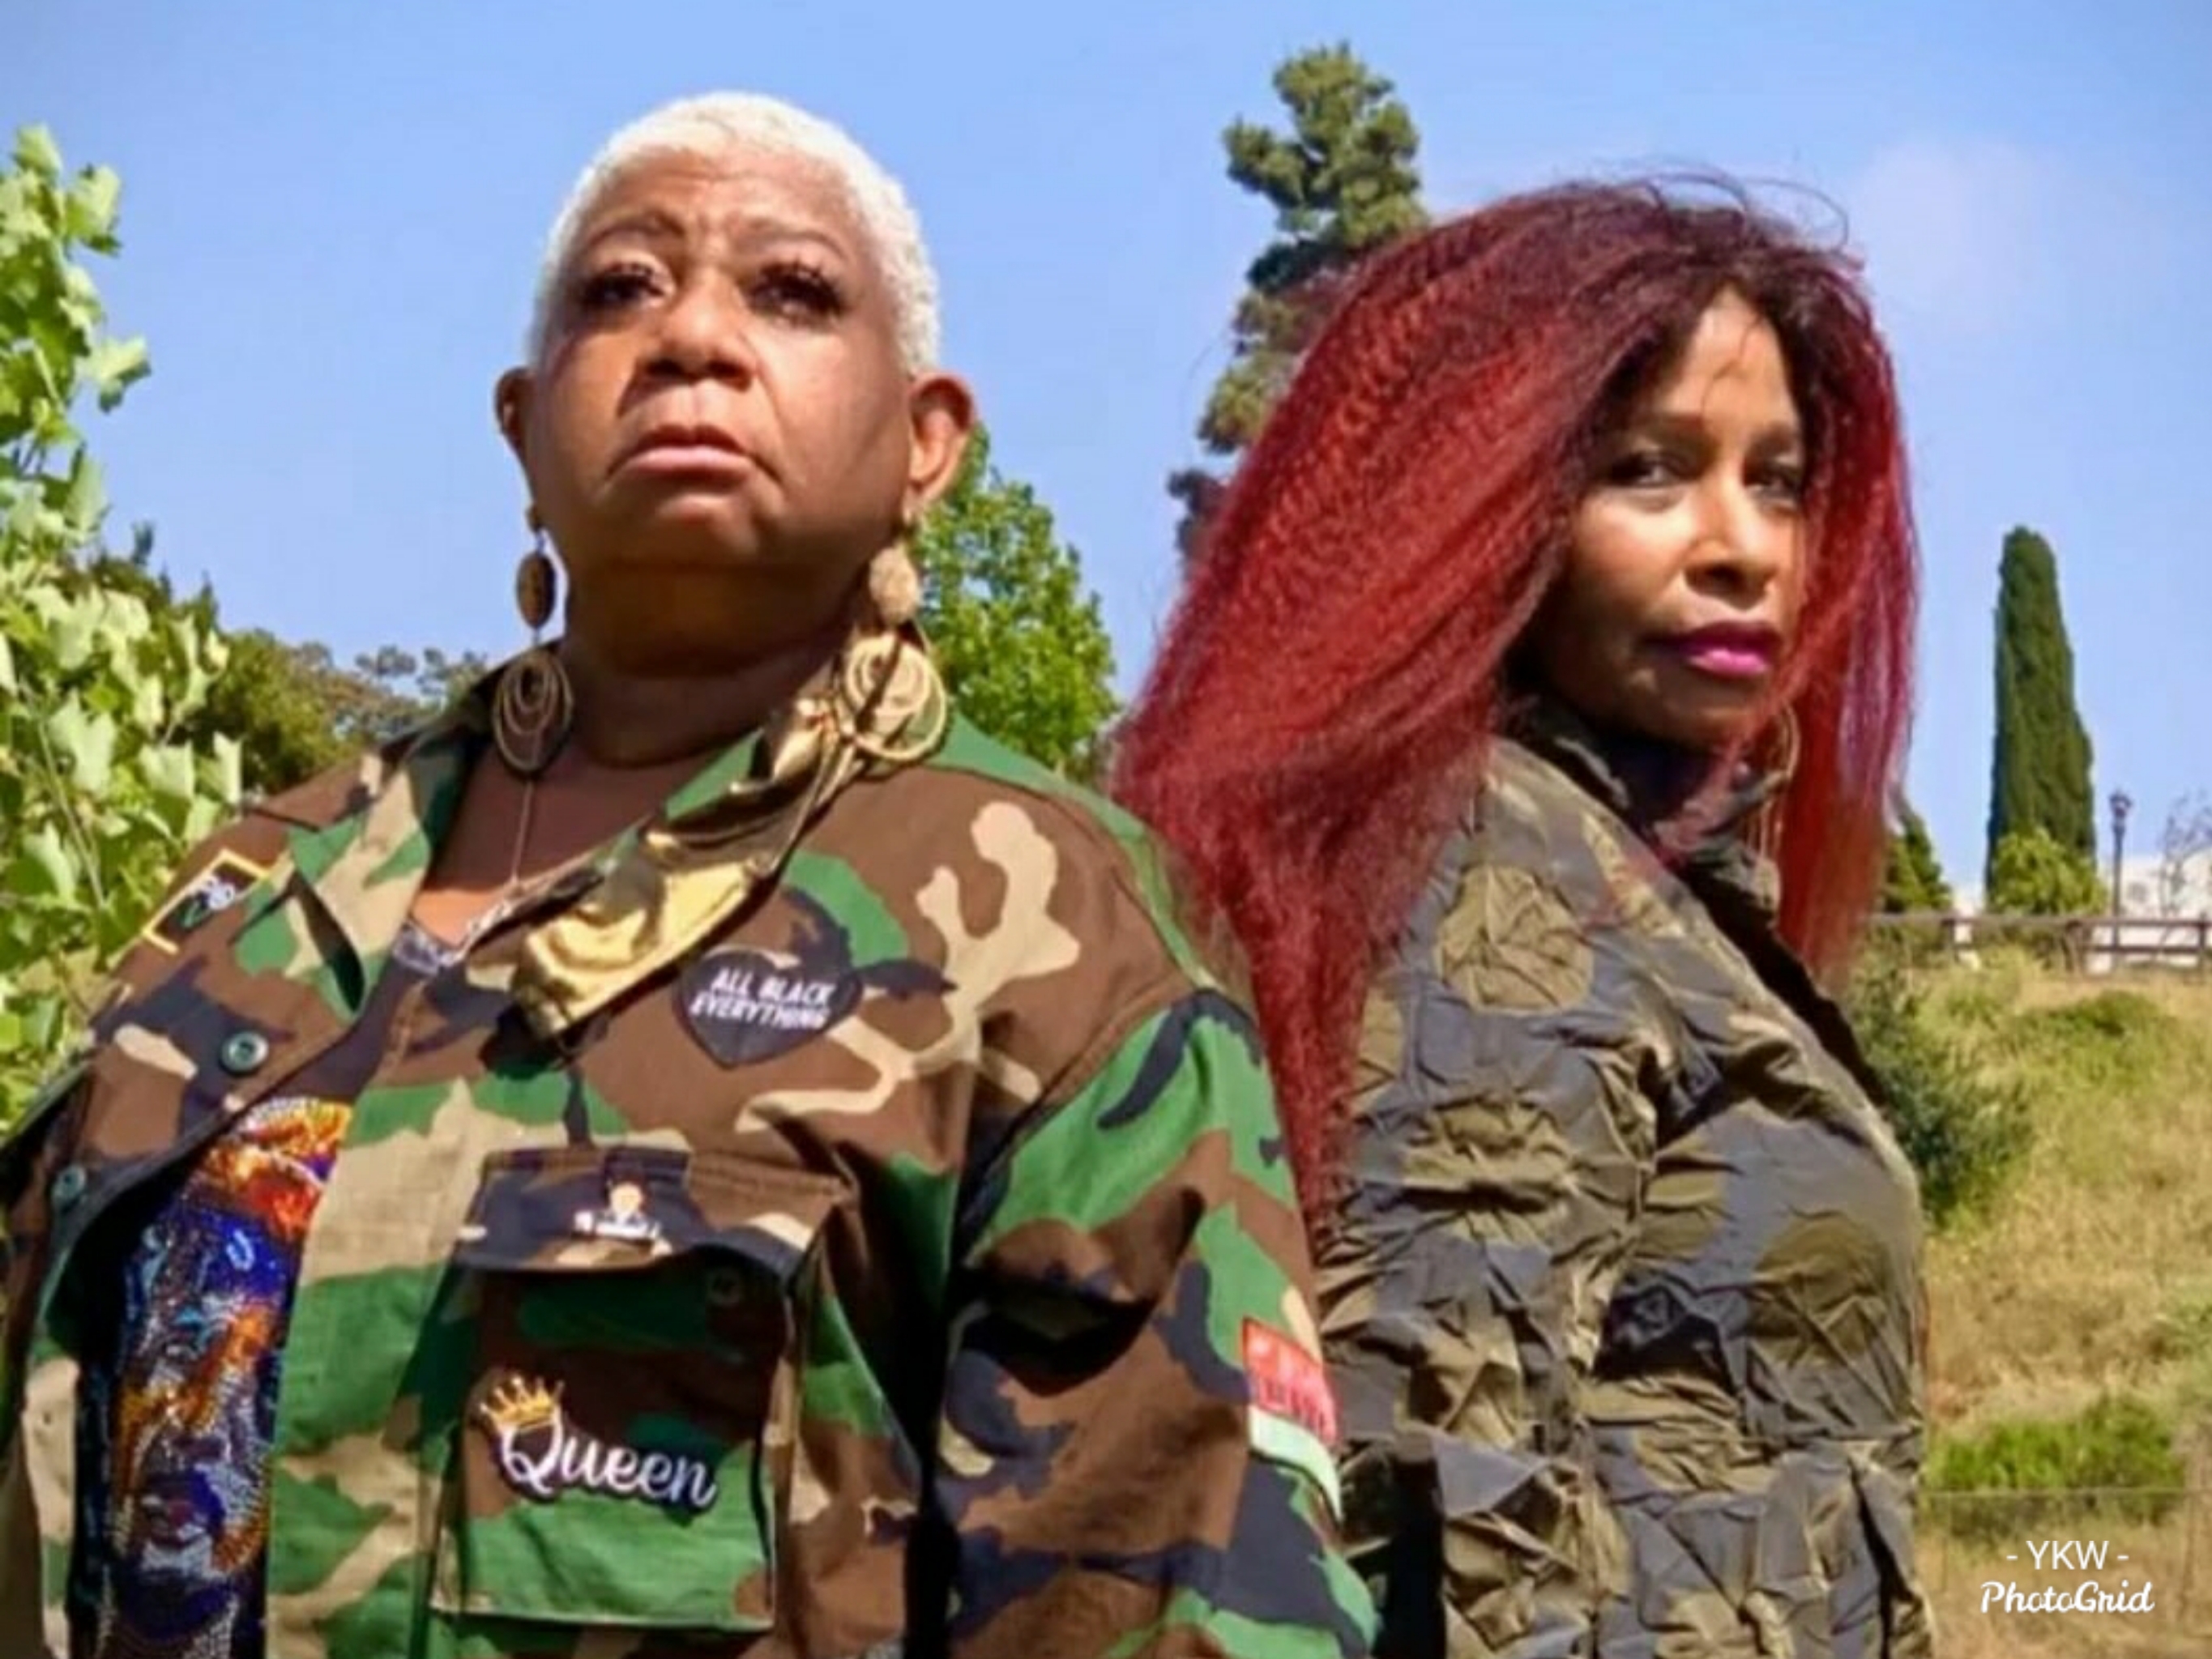 Chaka Khan And Luenell Reflect On Mother’s Day Protest: Stop Killing Our Black Children